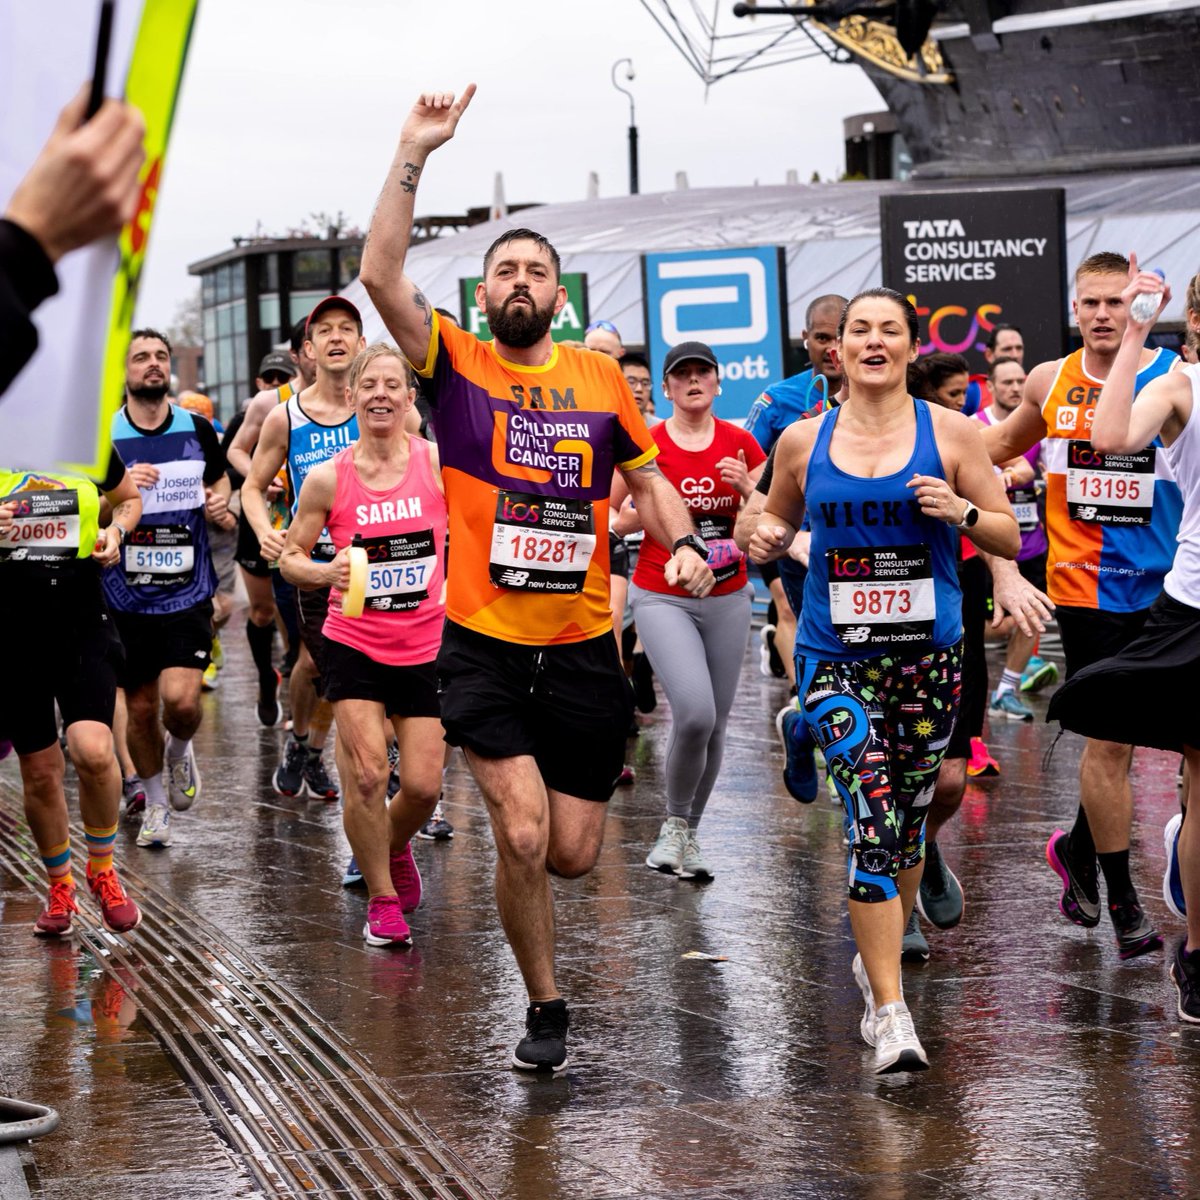 We're thrilled to share a special feature from Beccy, our Sports Events Manager. 'The TCS @LondonMarathon holds a special place in the heart of Children with Cancer UK. Thousands of runners have completed that 26.2 mile course whilst wearing our colours'. bit.ly/3vLFagF.